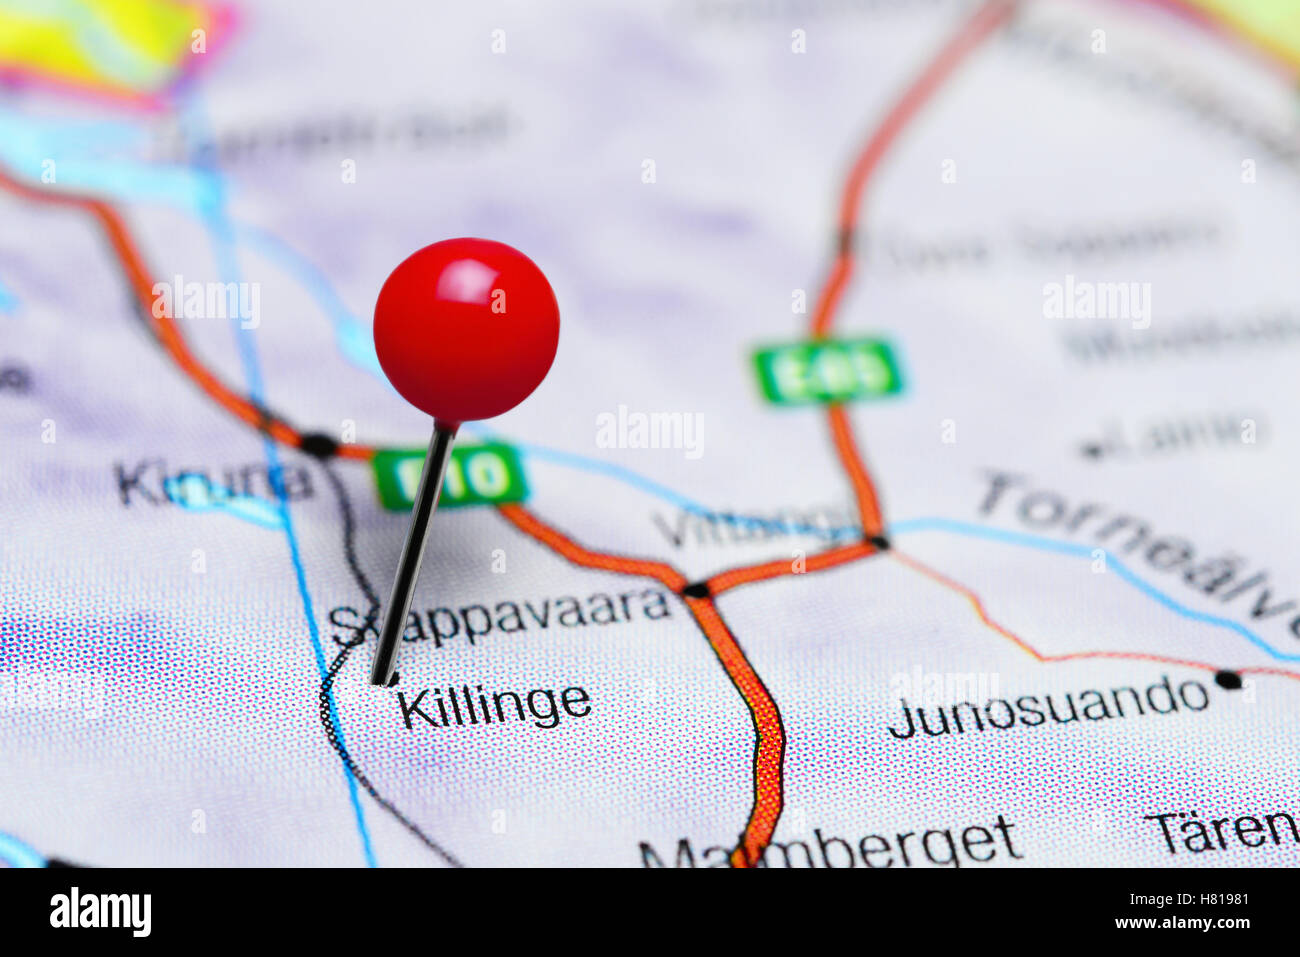 Killinge pinned on a map of Sweden Stock Photo